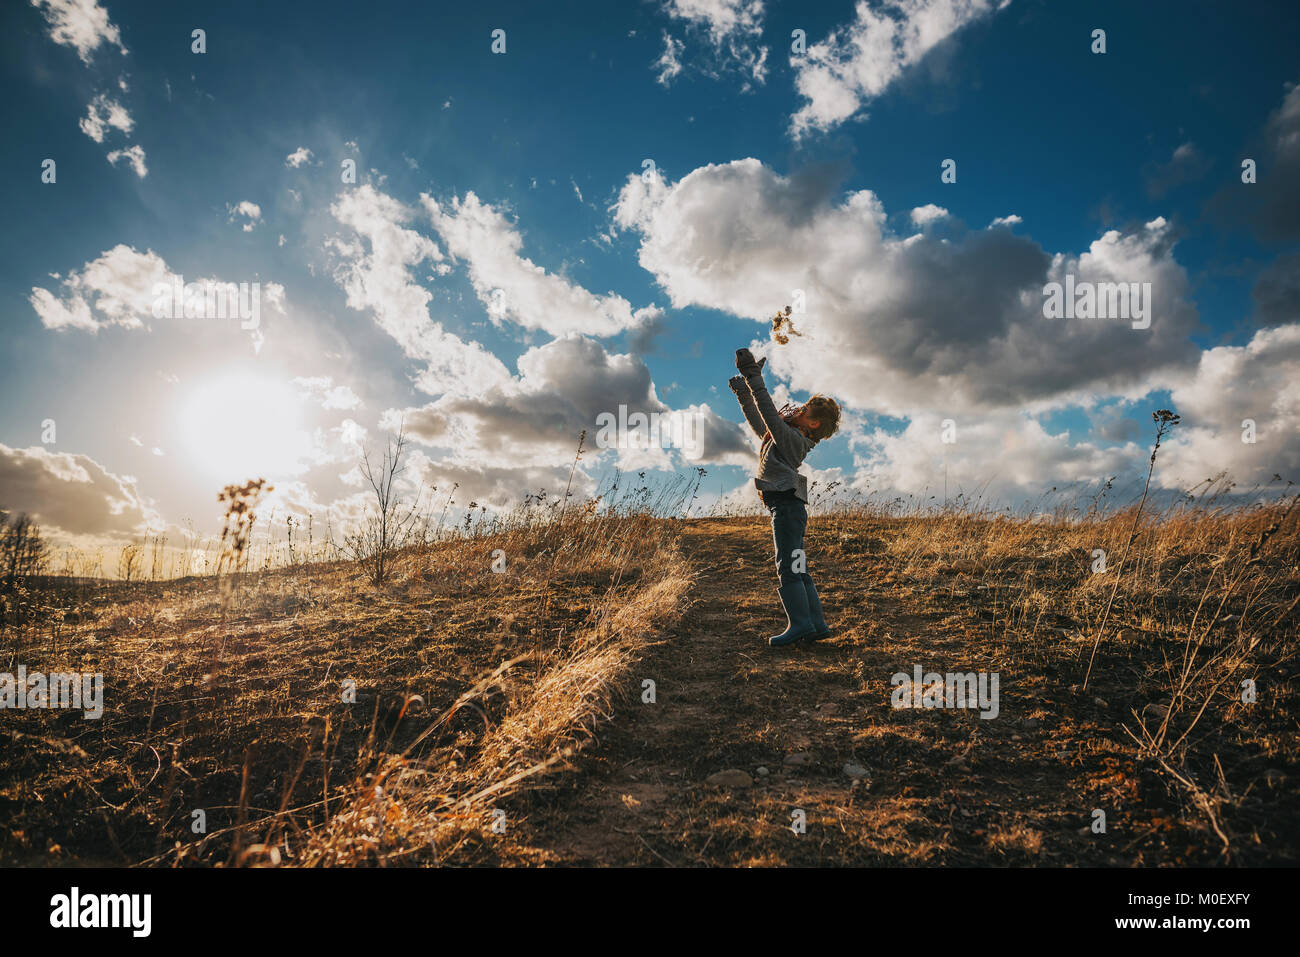 Boy standing in a field throwing flowers in the air Stock Photo